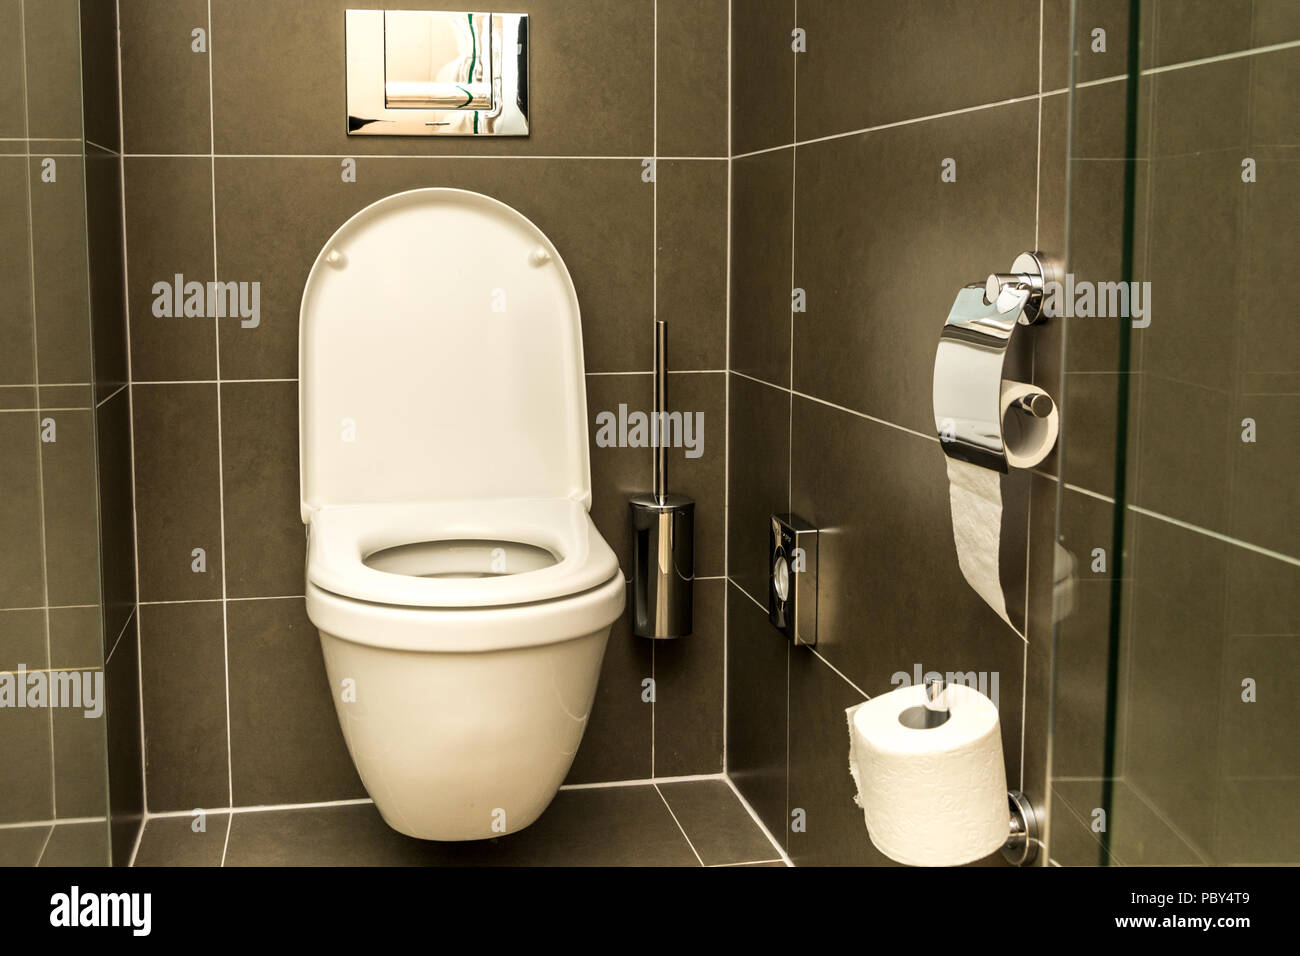 https://c8.alamy.com/comp/PBY4T9/luxury-bathroom-features-basin-and-toilet-bowl-PBY4T9.jpg